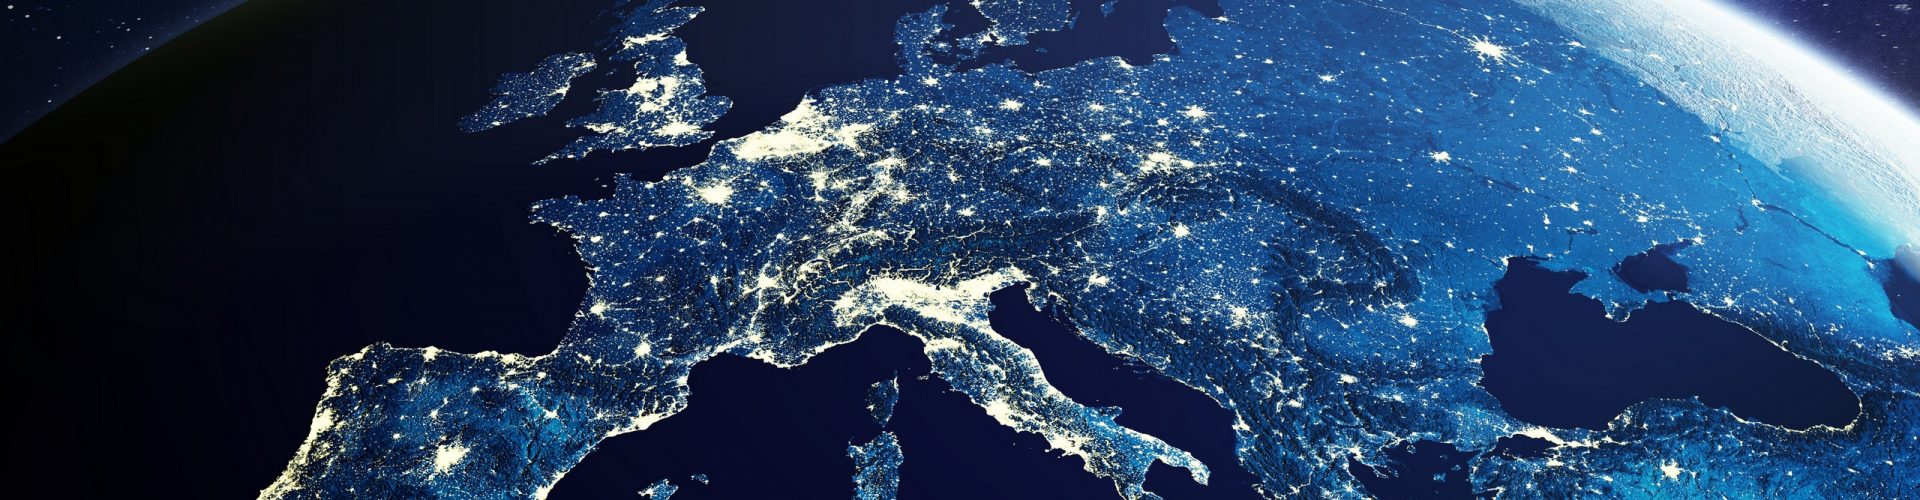 Europe from space at night with city lights showing European cities in Germany, France, Spain, Italy and United Kingdom (UK), global overview, 3d rendering of planet Earth, elements from NASA